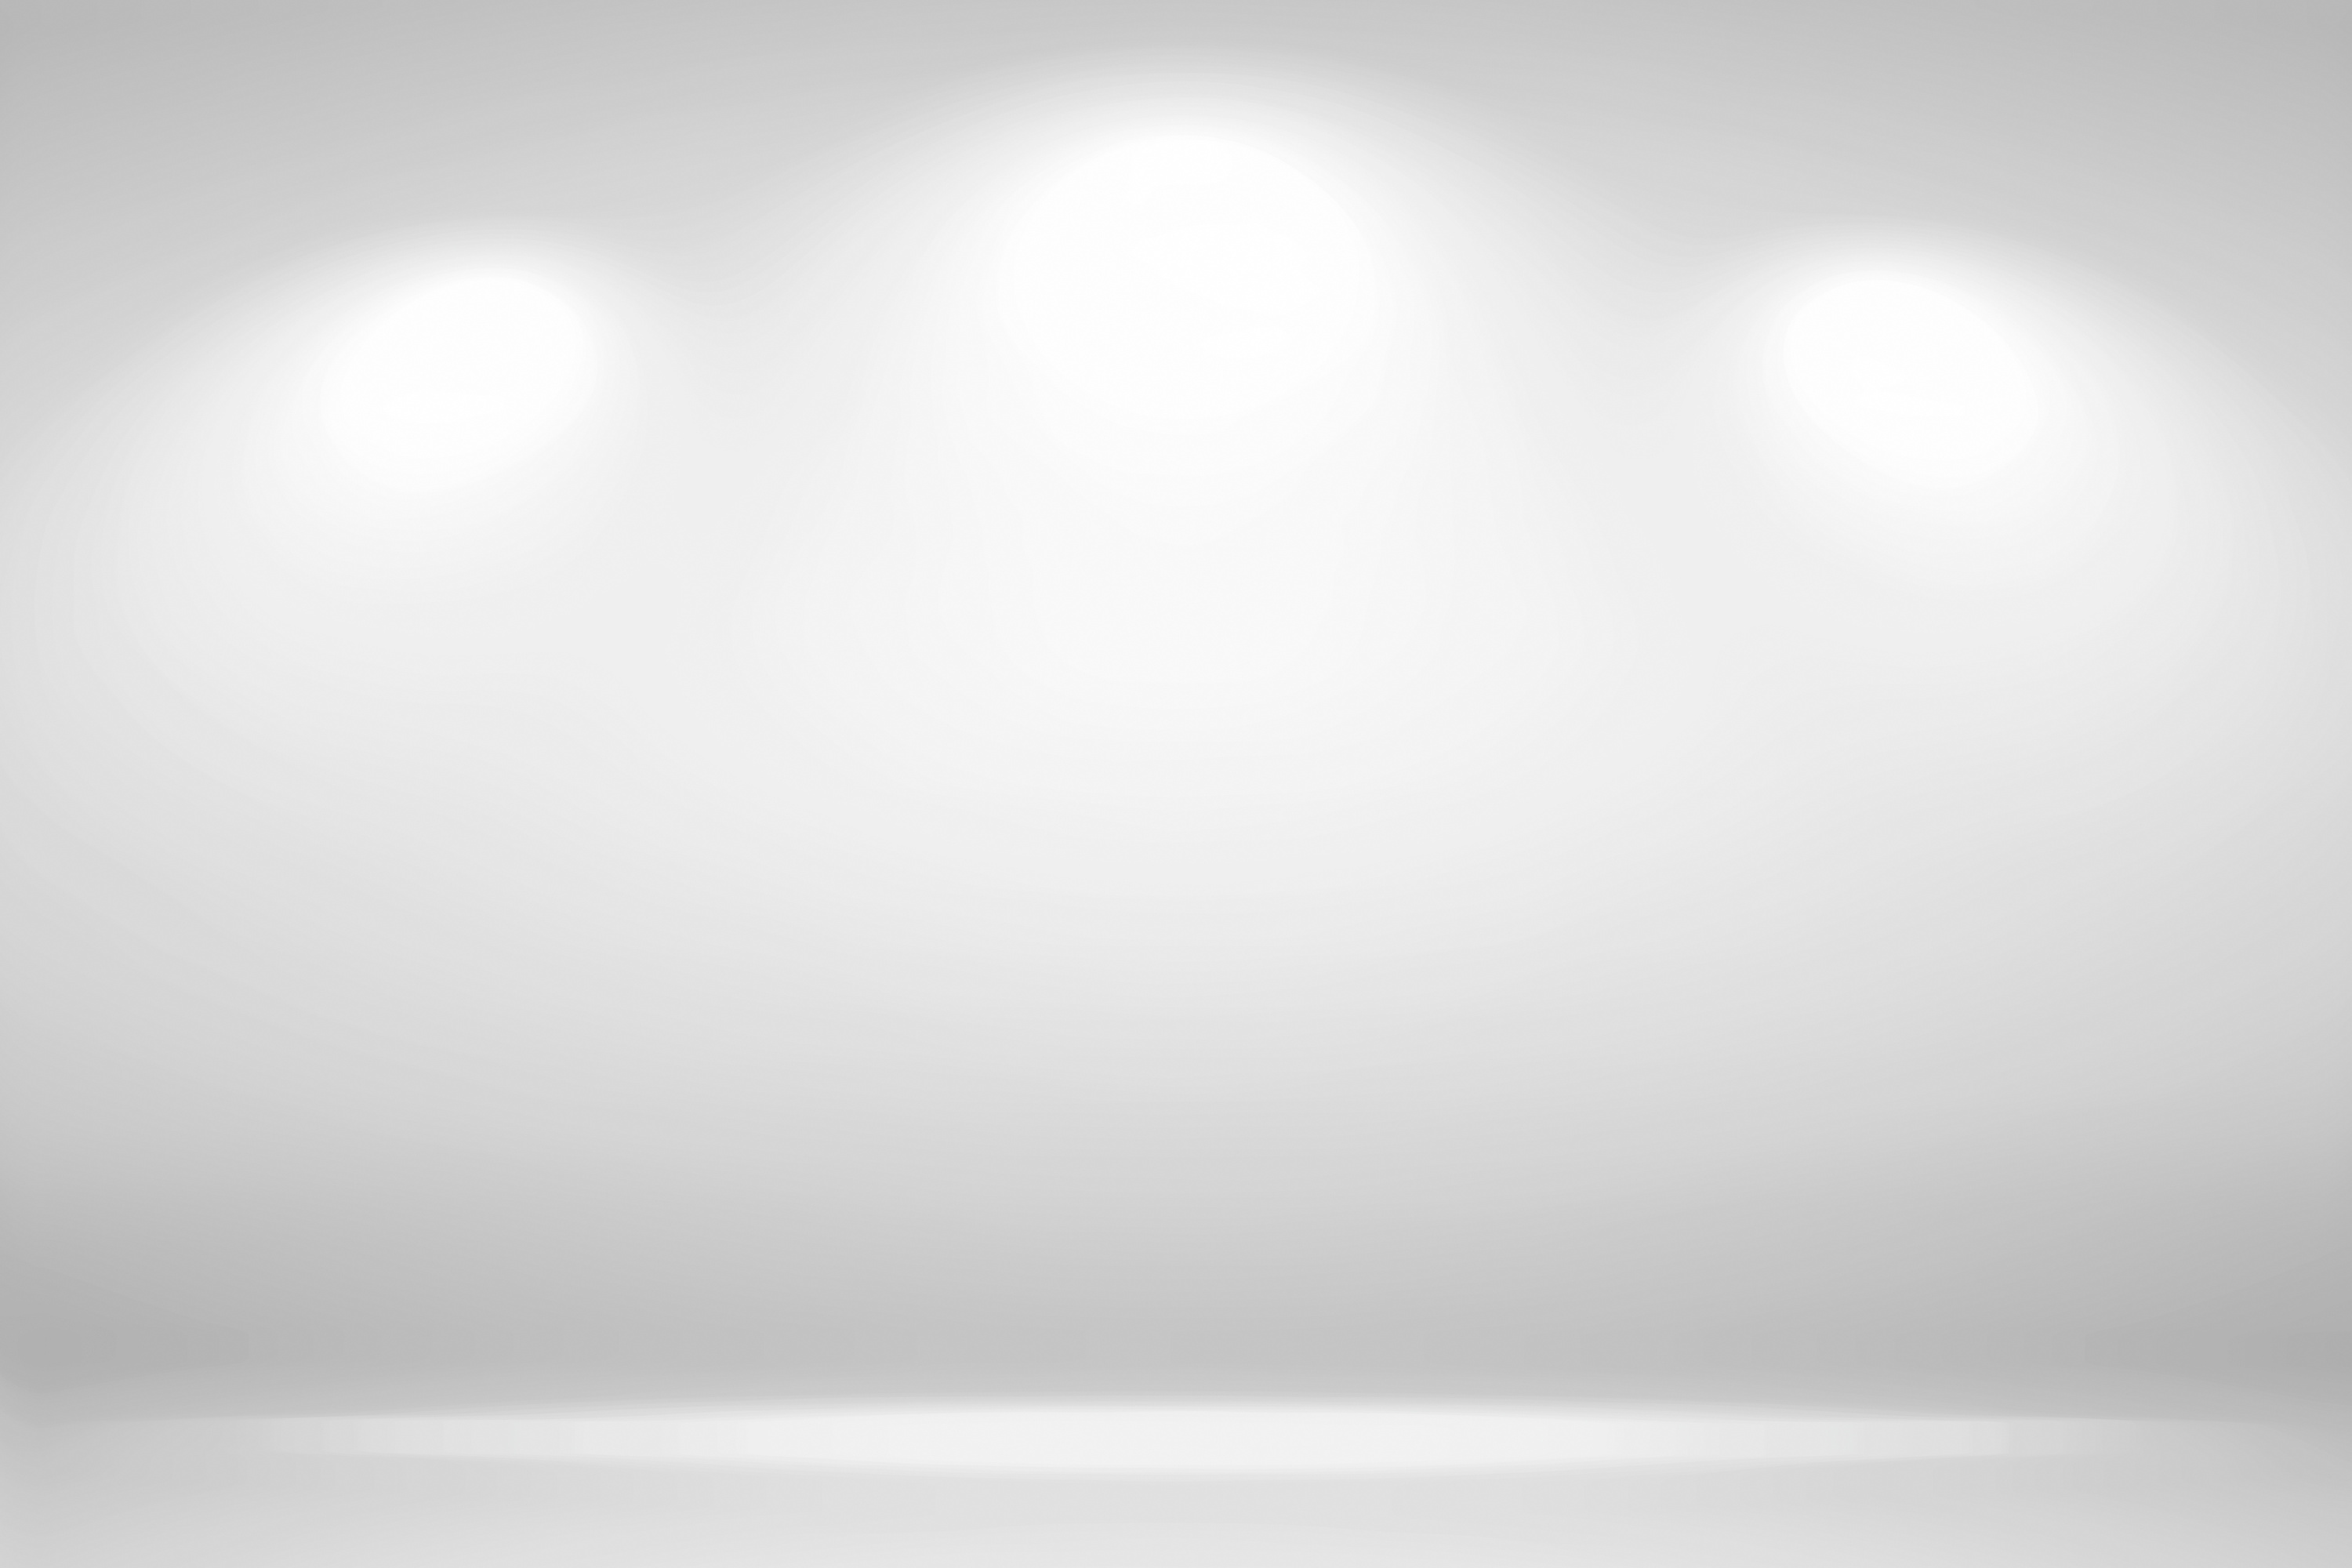 Spotlights Scene. Abstract white background empty room studio background and display your product with spot lights